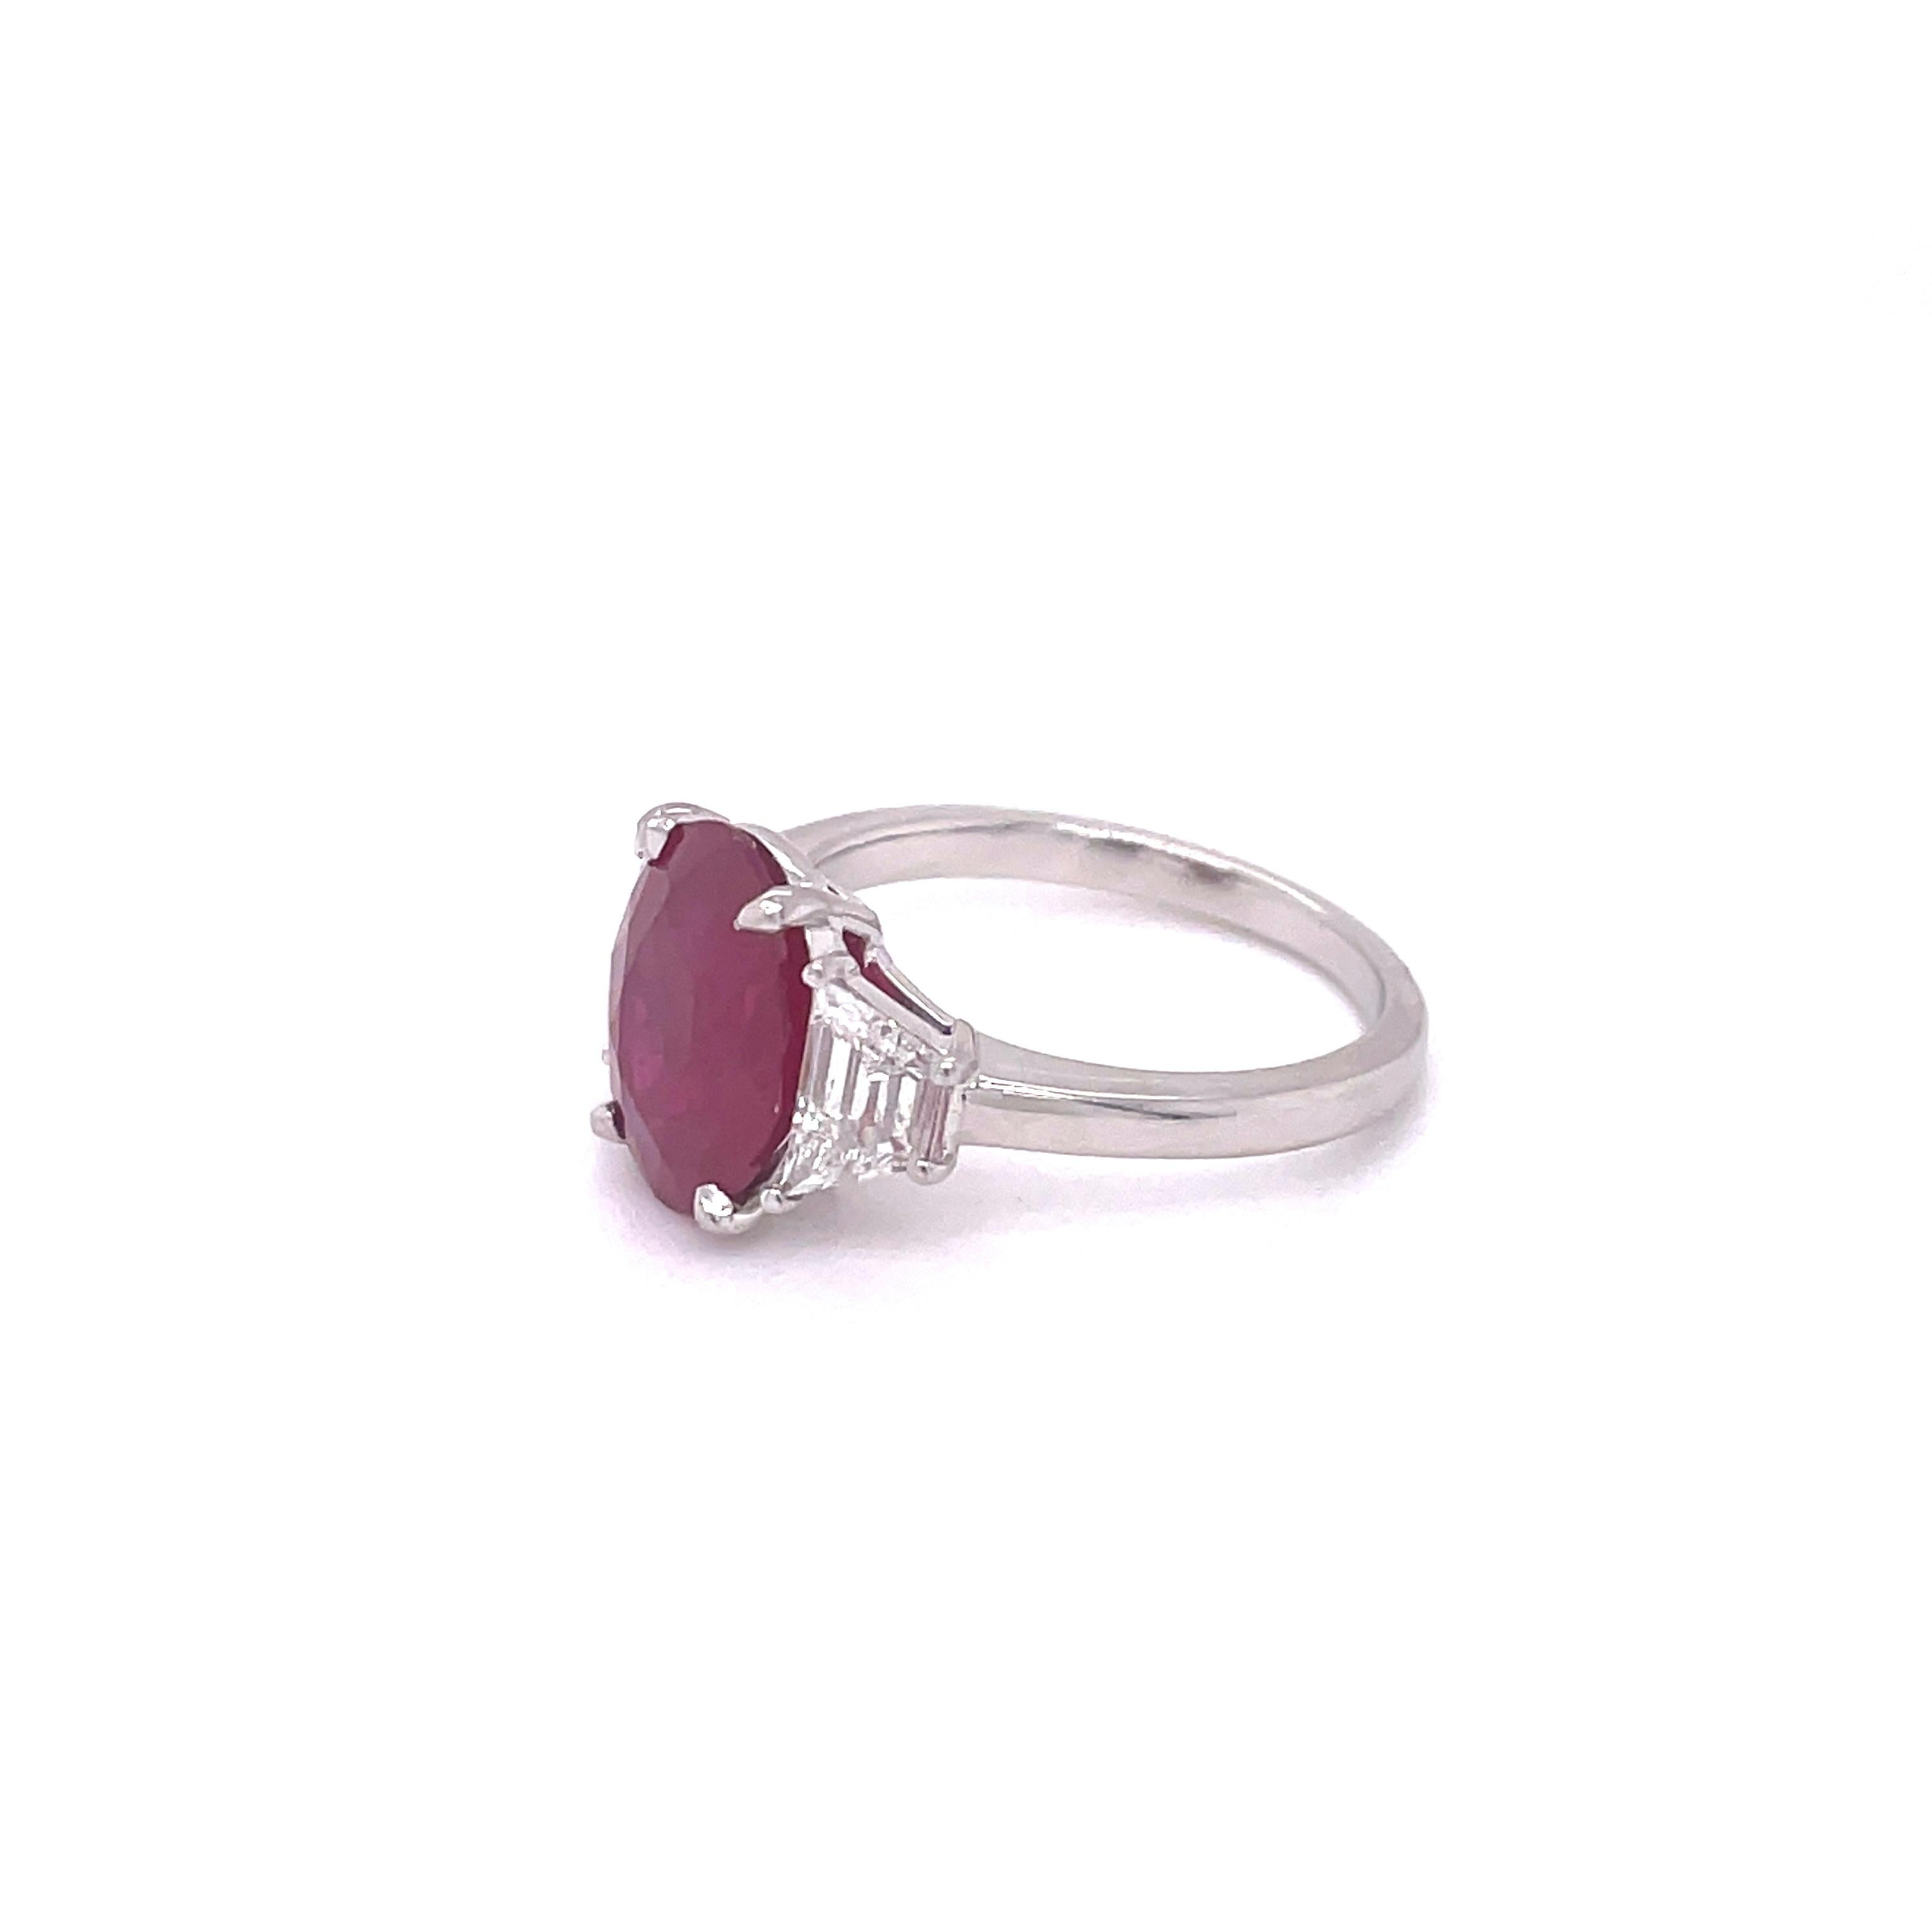 3.83ct Oval Burma Ruby set in Platinum 
with 2 side trapezoid diamonds = 0.56cttw
GRS #2015-042465